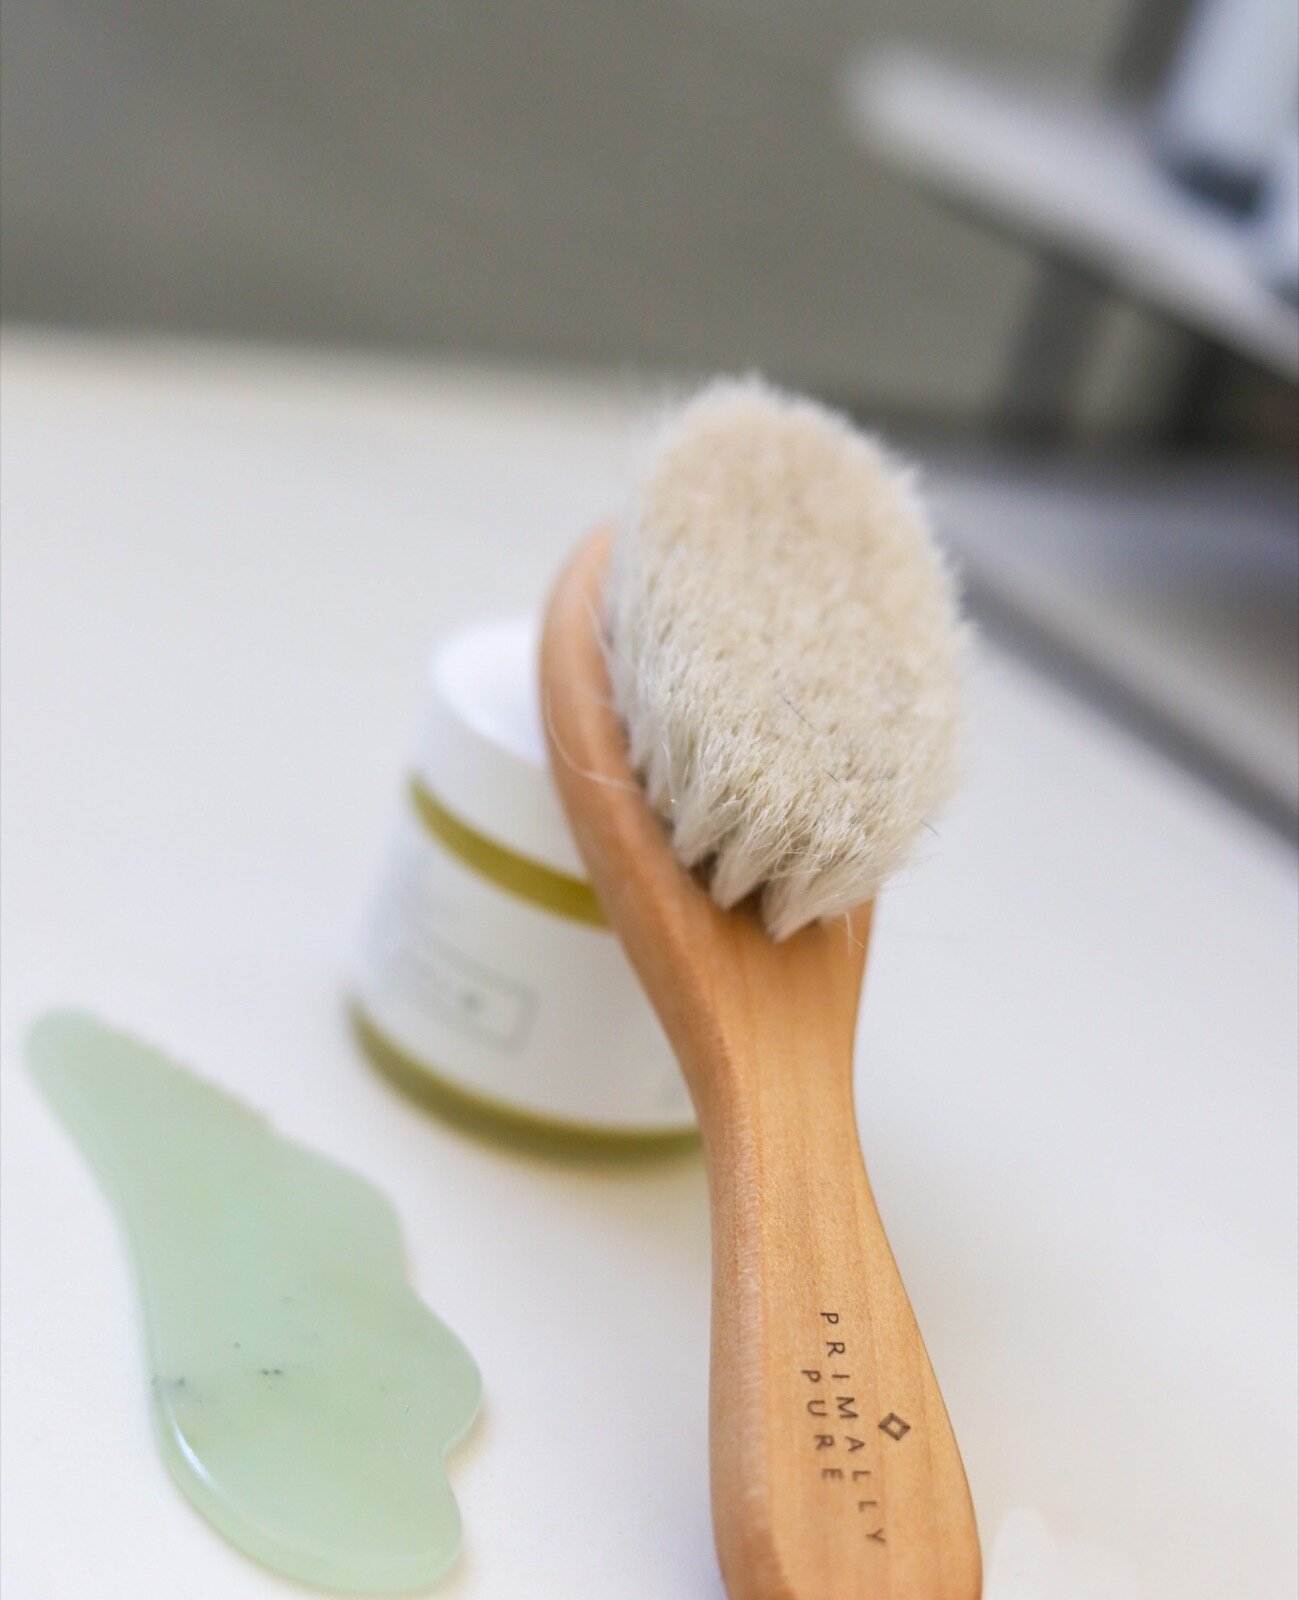 using a facial dry brush in your skincare routine, primally pure discount code, lments of style, la blogger, dry brushing benefits, primally pure facial dry bush, easy skincare routine, pregnancy safe skincare tools